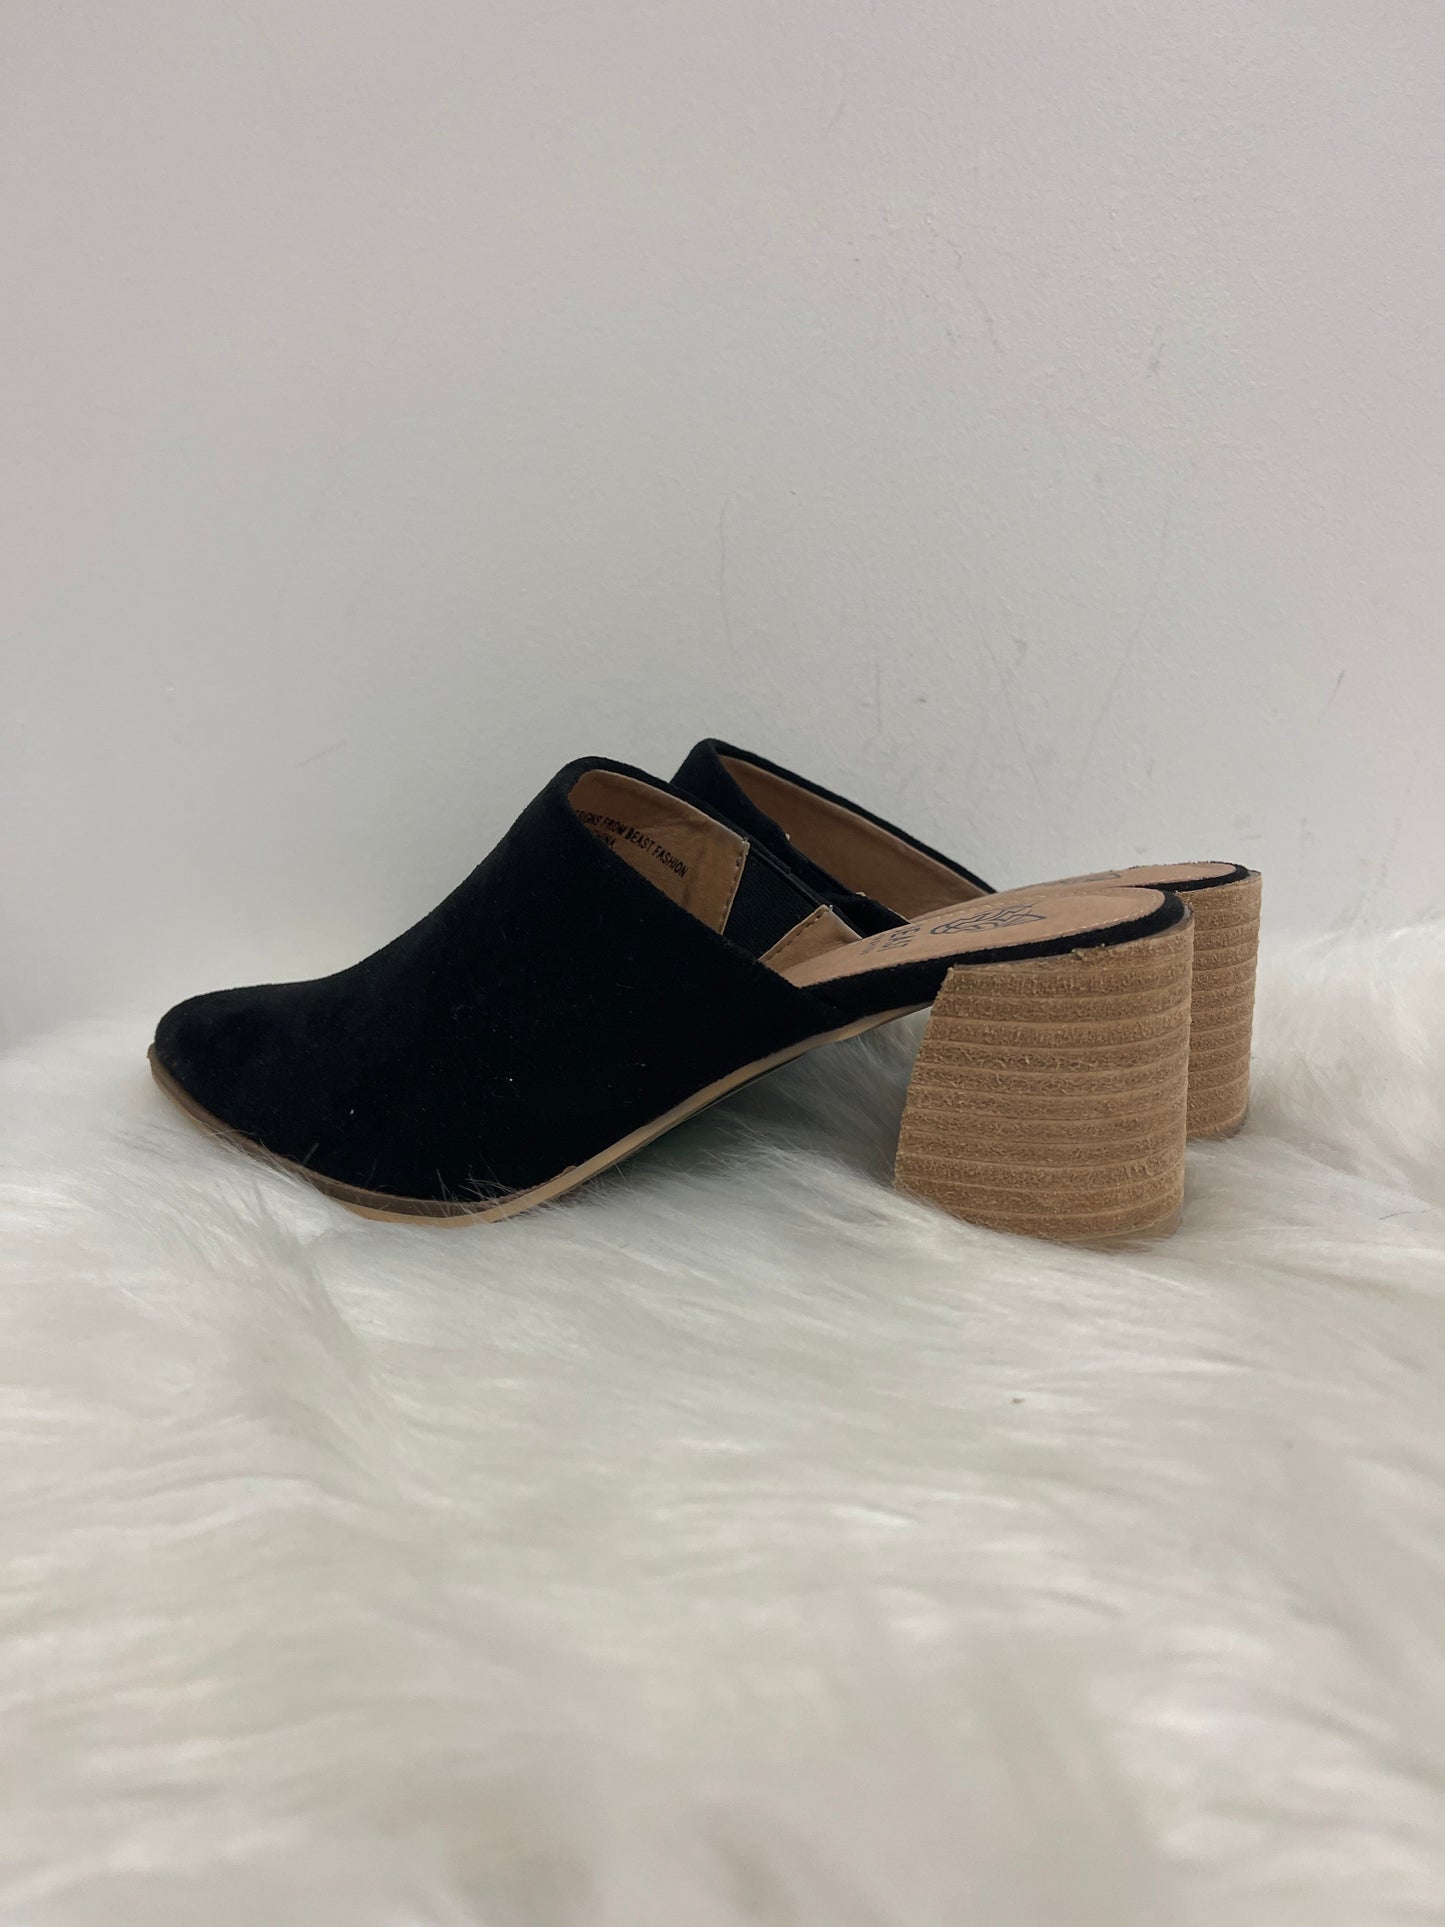 Shoes Heels Block By Cmc  Size: 8